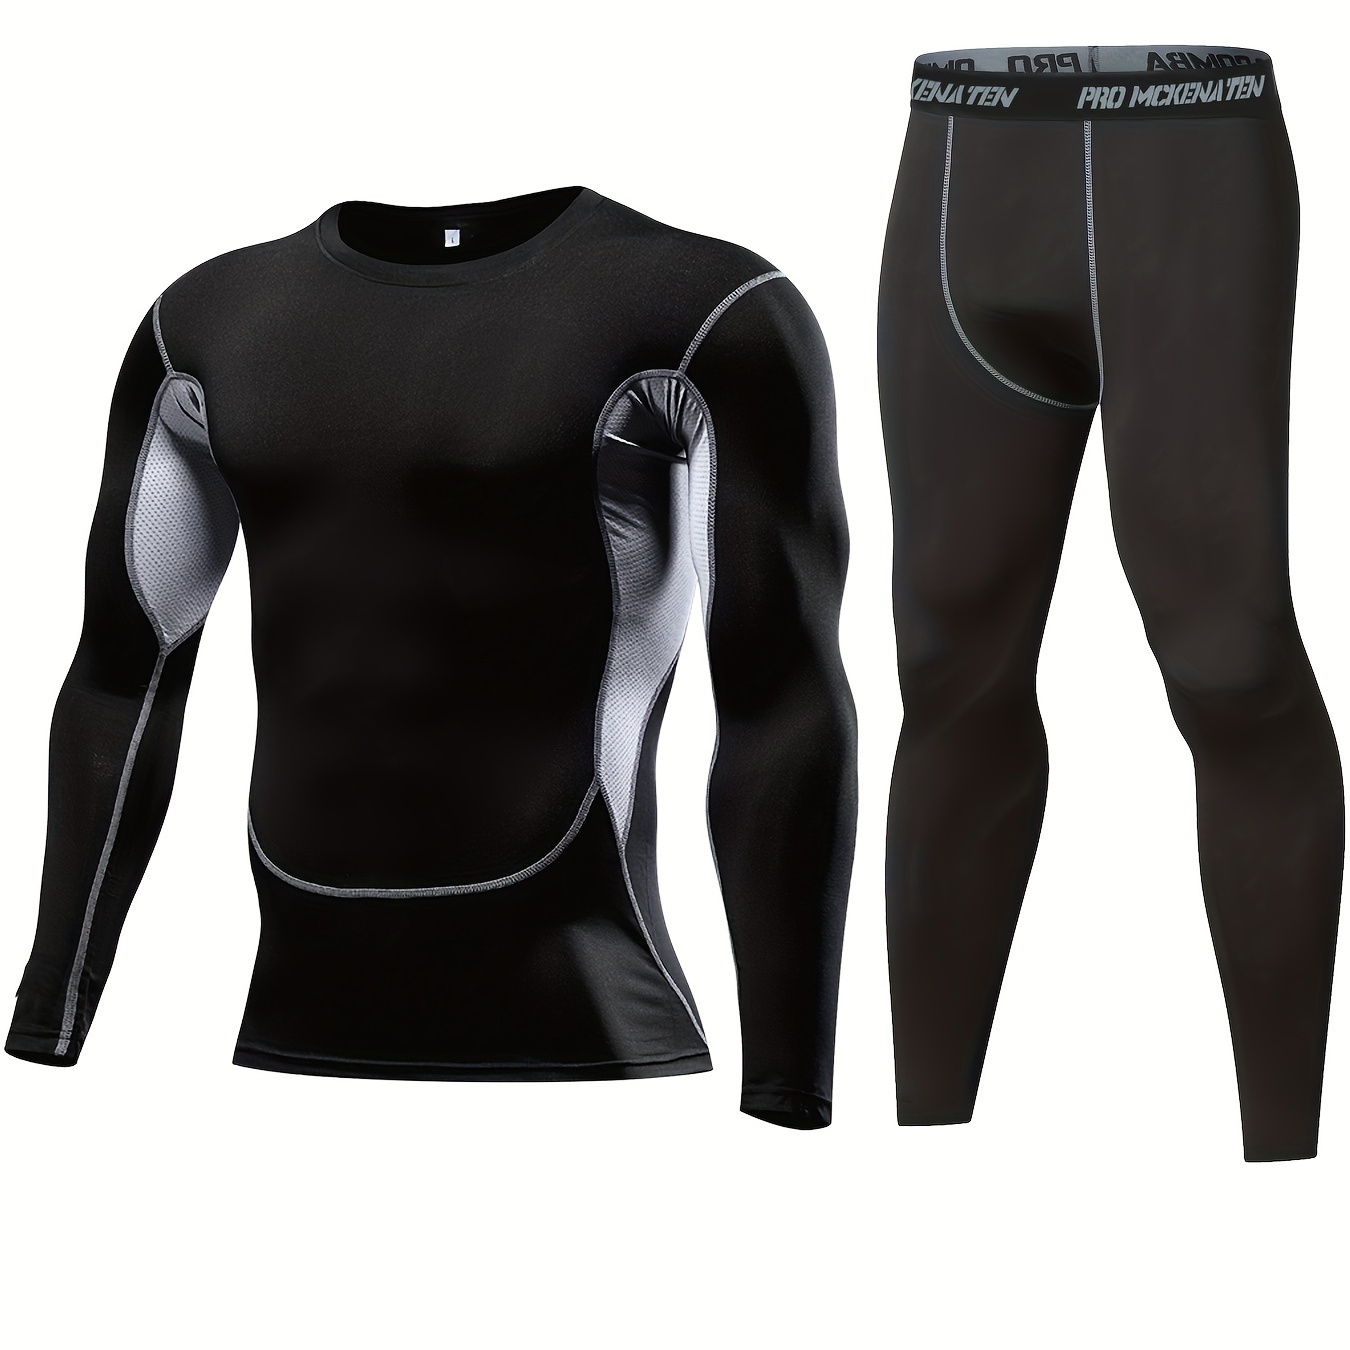 

Men's Tight Sportswear Gym Workout Running Sports Suits, Mesh Breathable Comfy Long Sleeve Shirts Tops & Indoor Workout Pants Sets